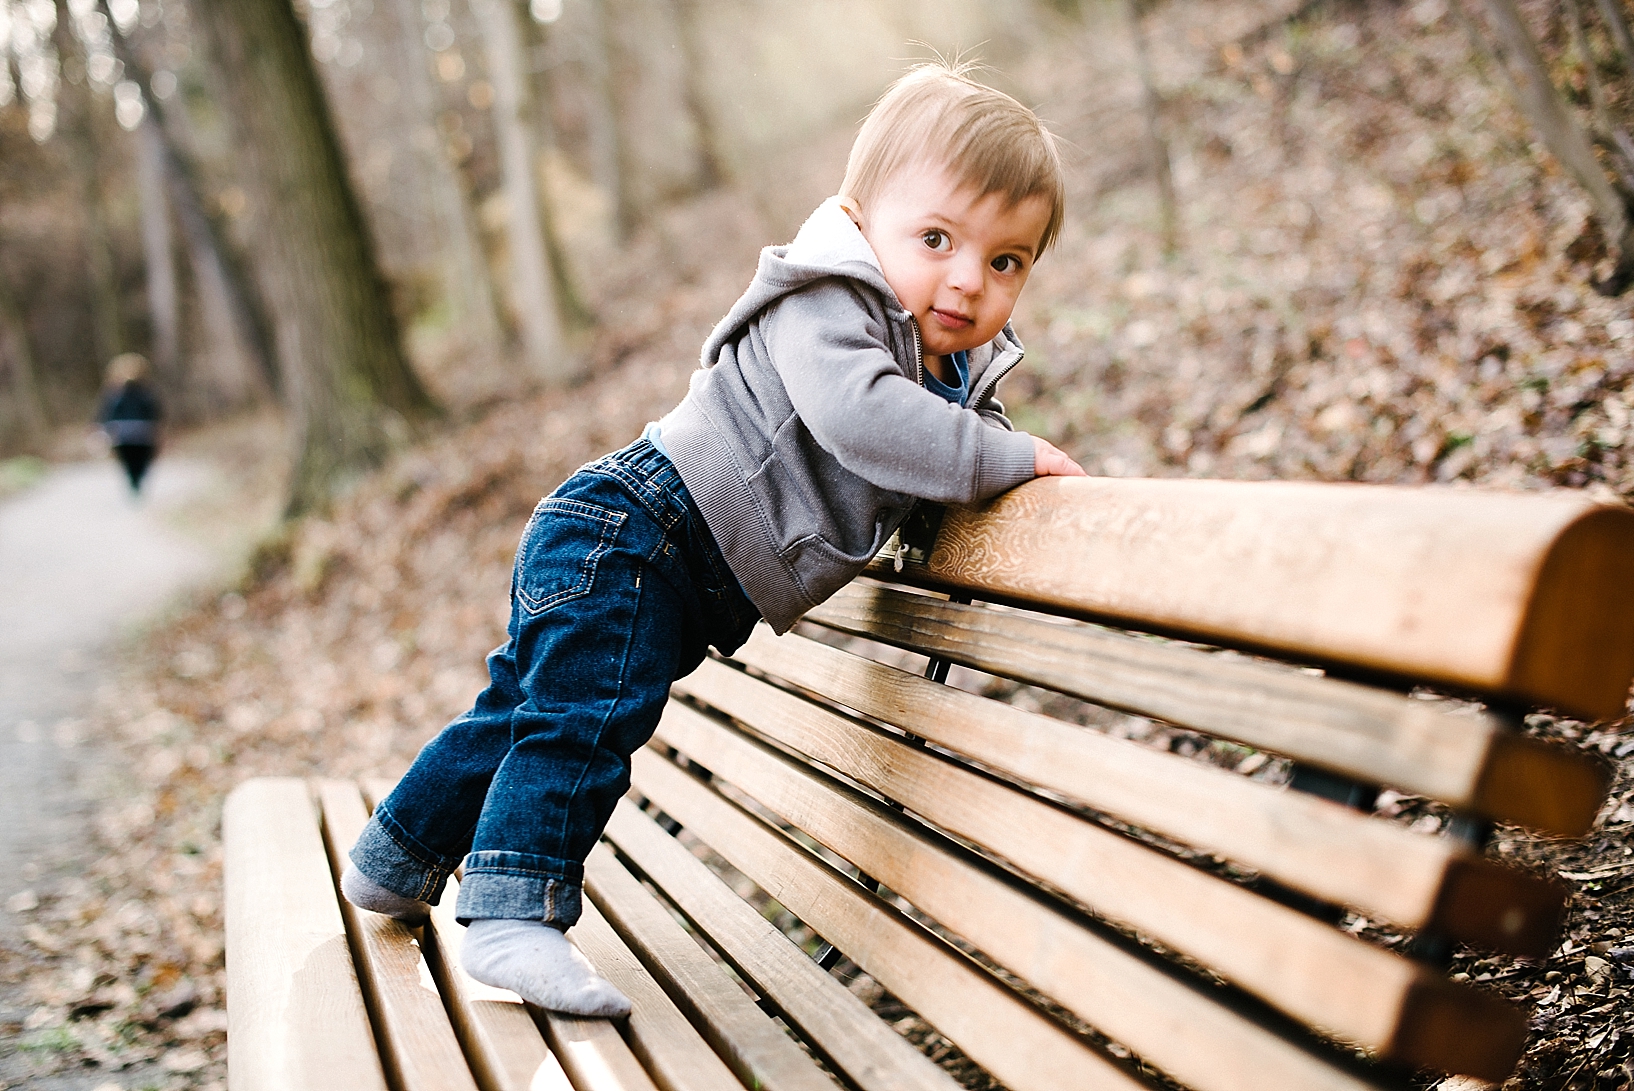 one year old boy wearing jeans and grey hoodie standing on park bench